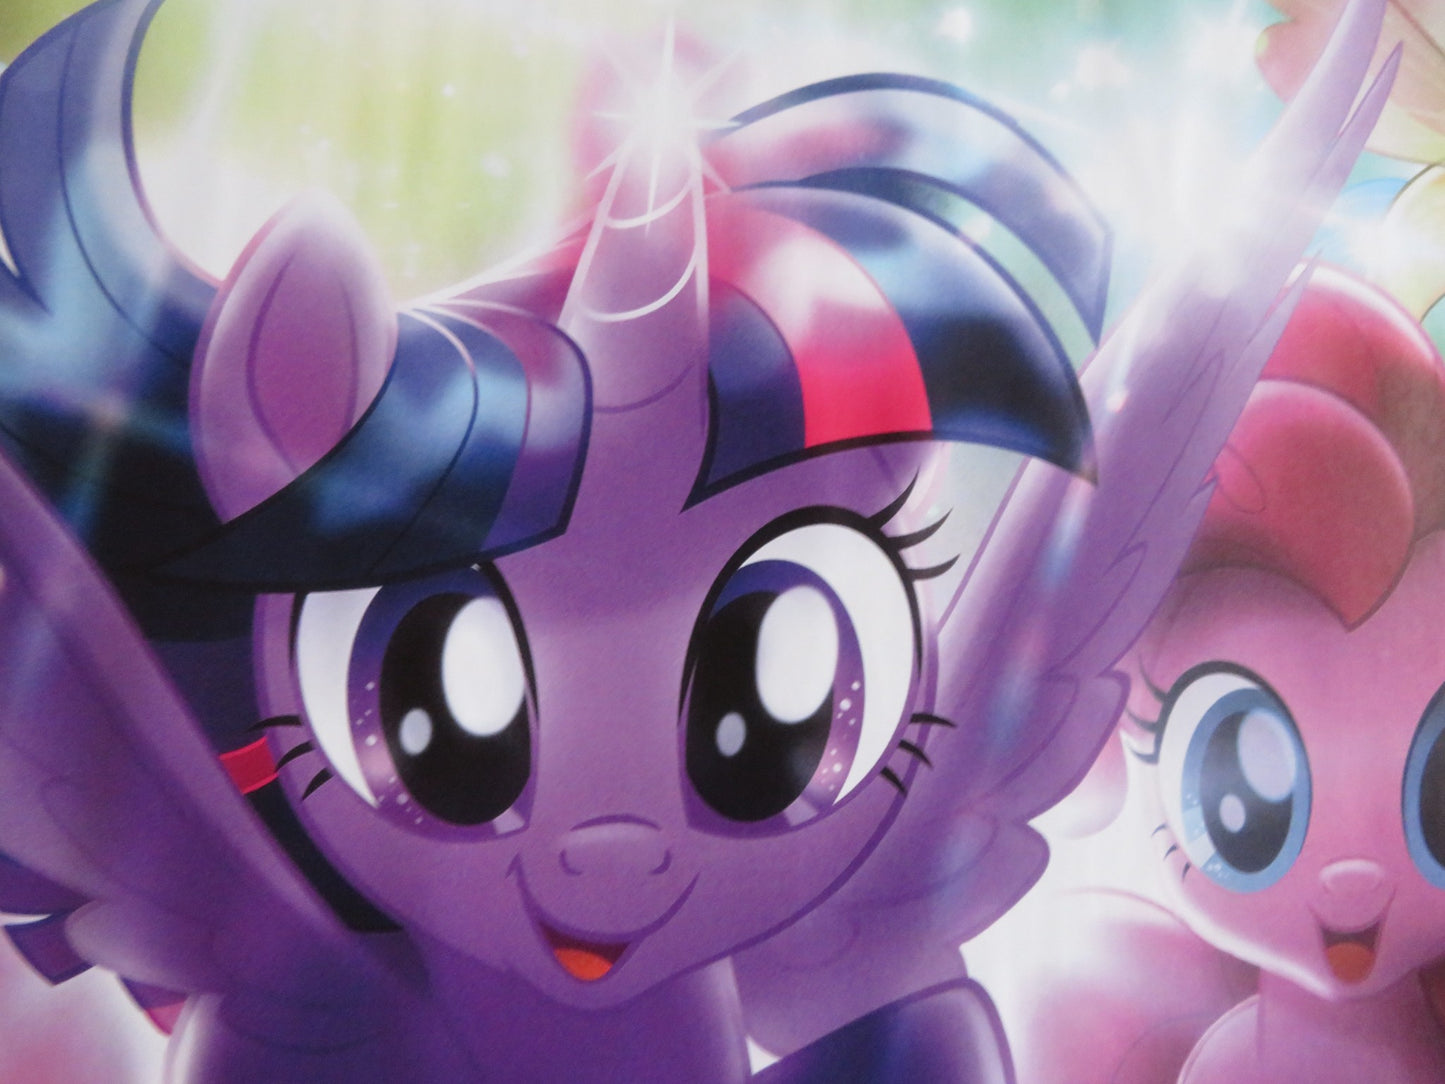 MY LITTLE PONY: THE MOVIE UK QUAD (30"x 40") ROLLED POSTER EMILY BLUNT SIA 2017